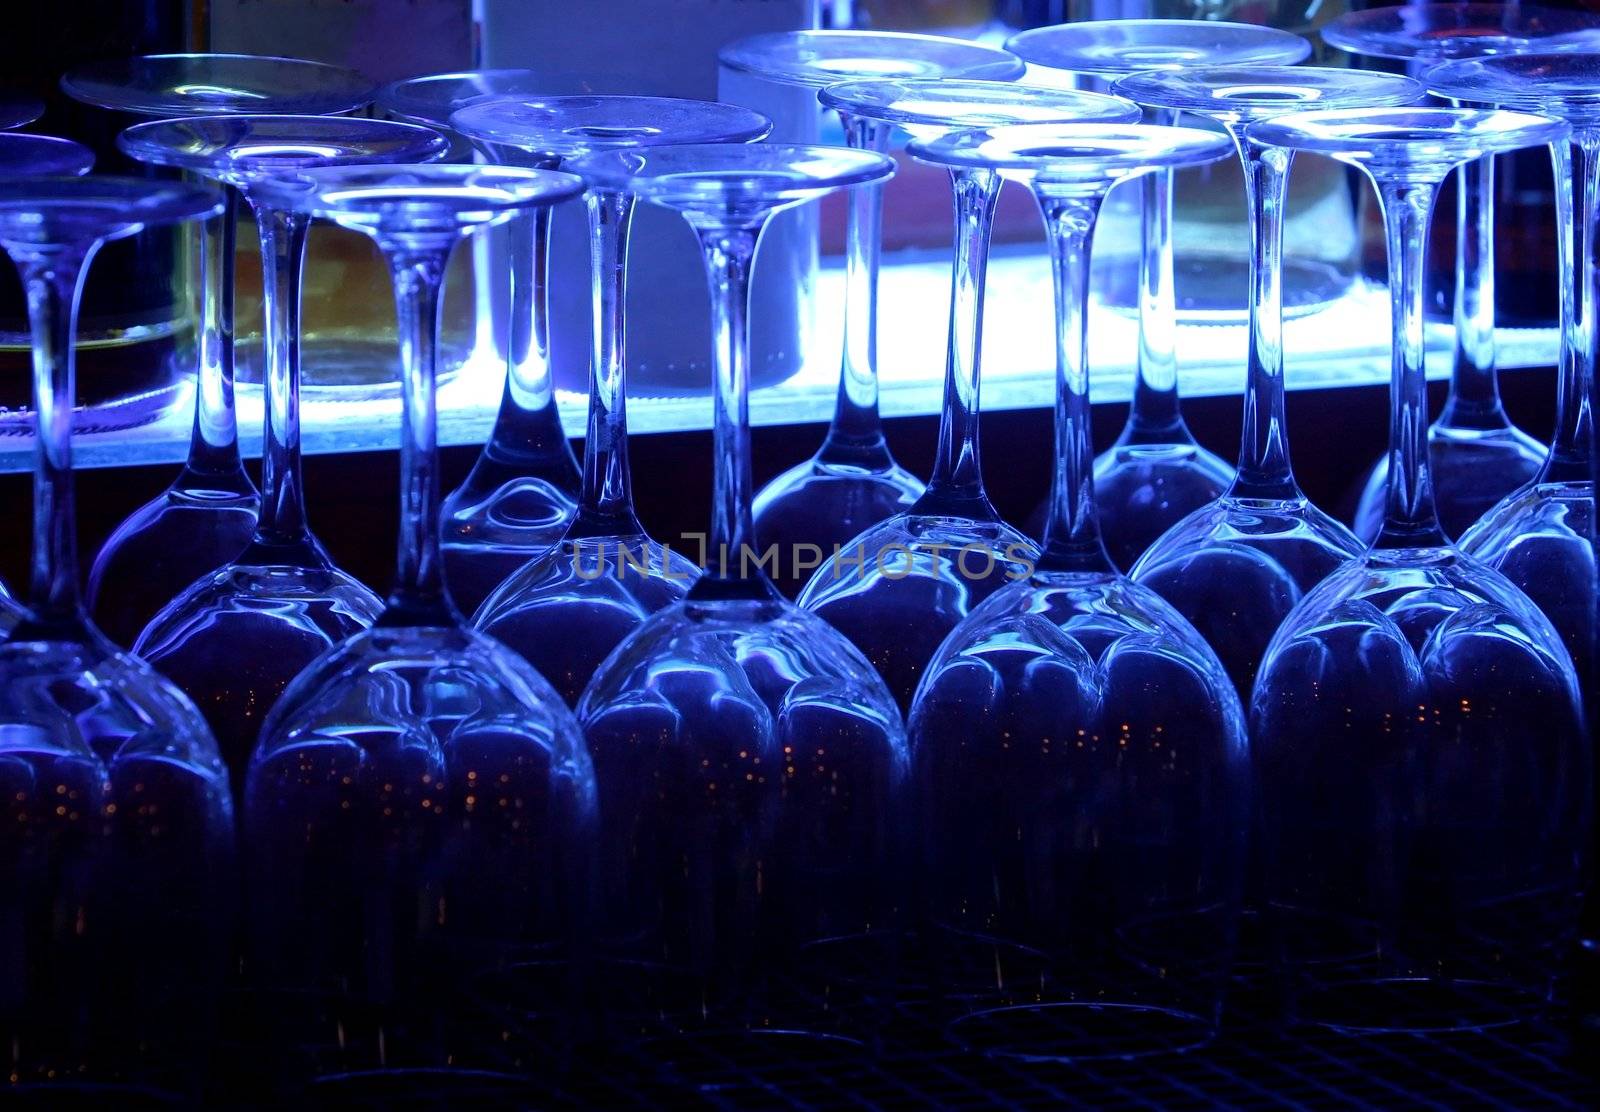 Wine glasses backlit with blue light and bottles in the background